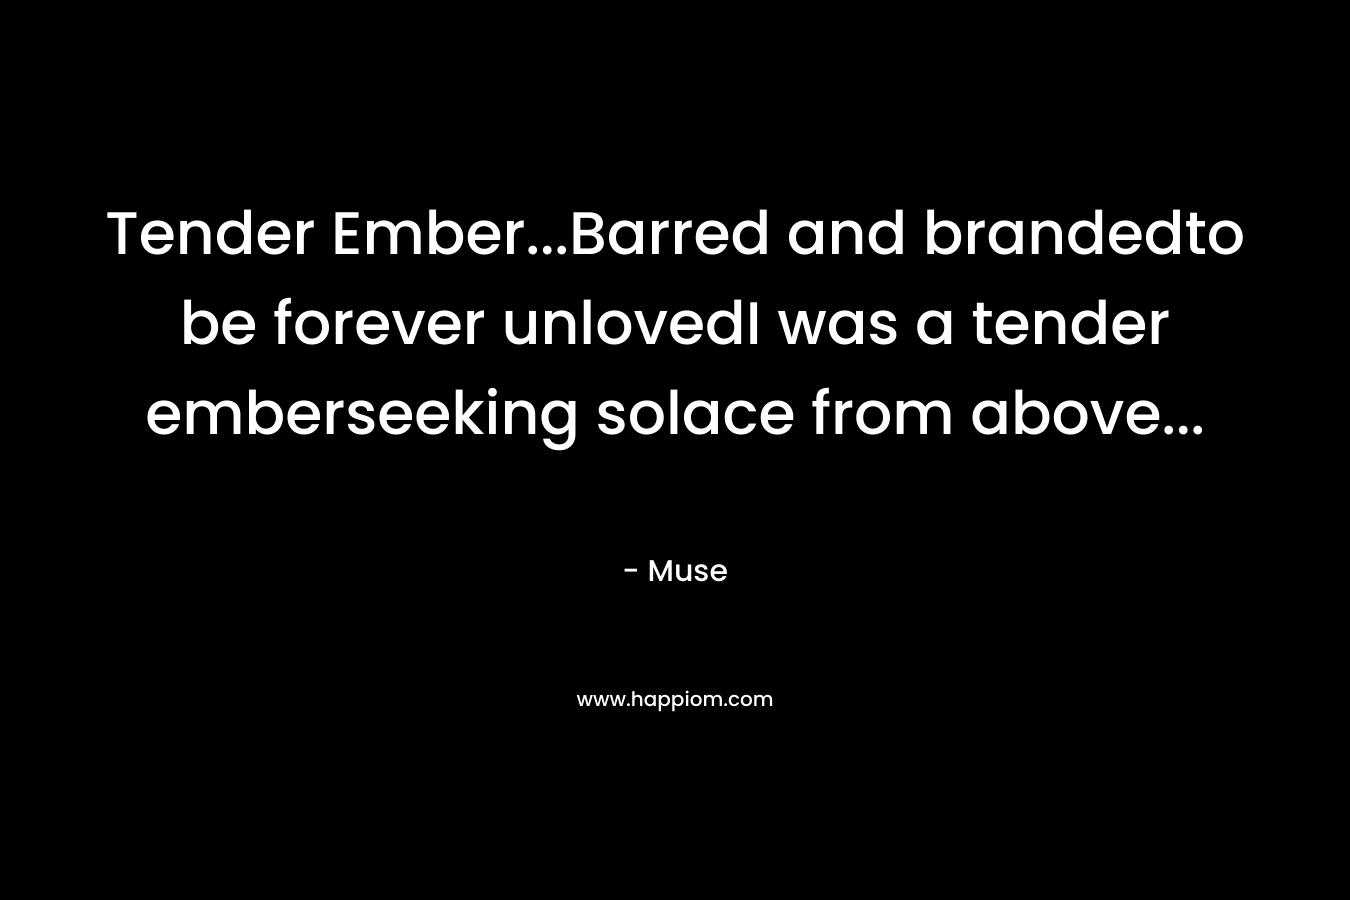 Tender Ember…Barred and brandedto be forever unlovedI was a tender emberseeking solace from above… – Muse